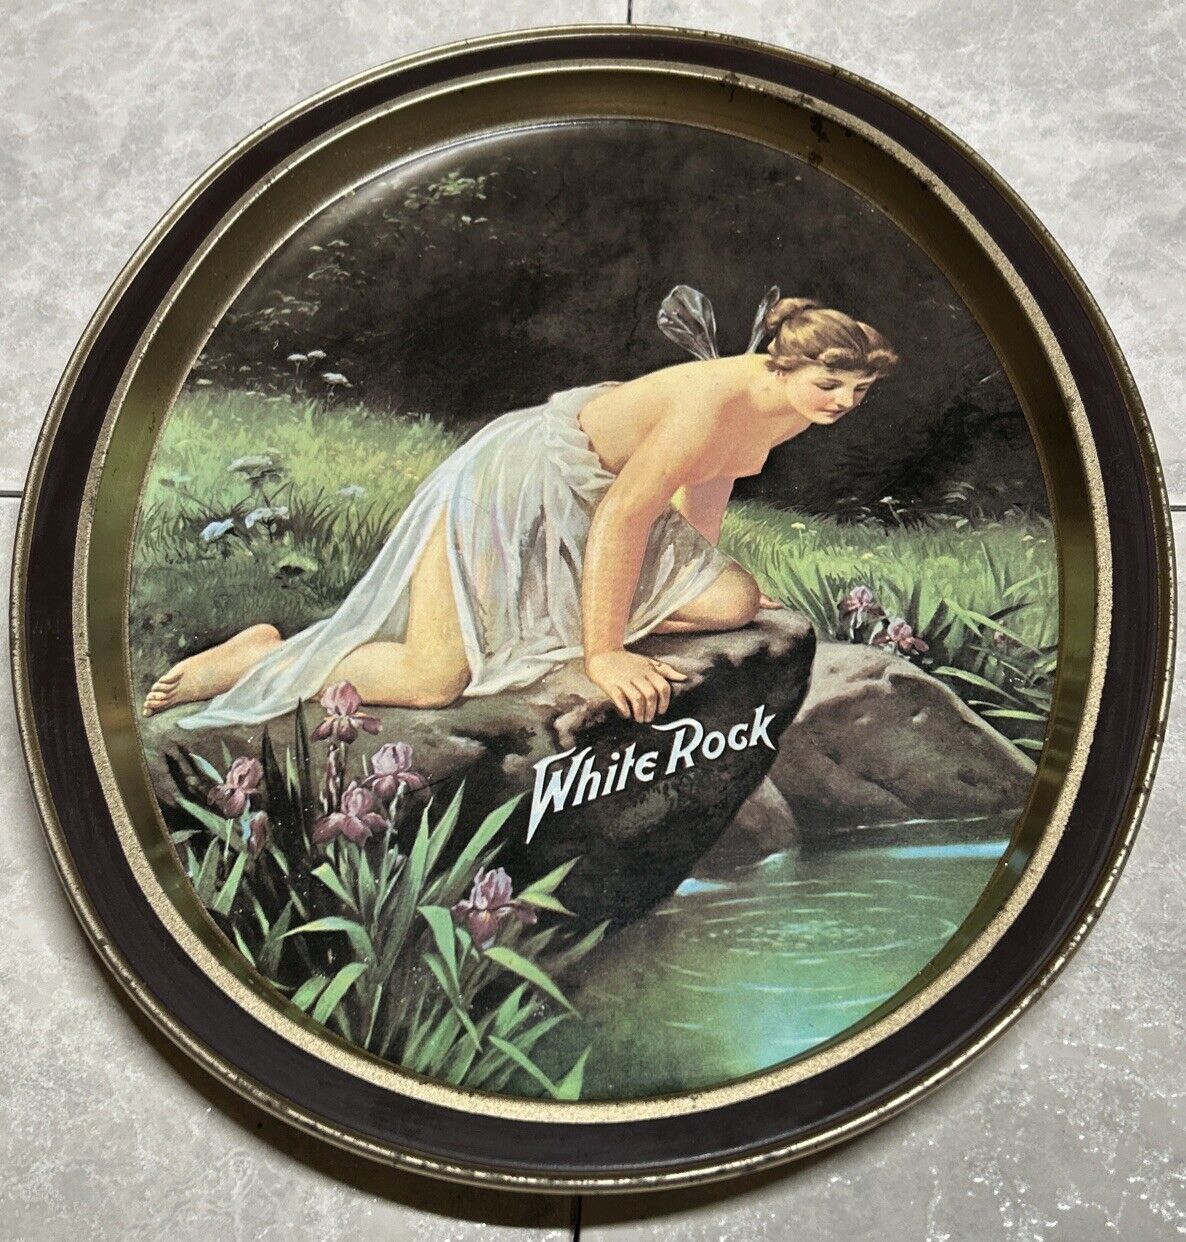 OLD WHITE ROCK PRODUCTS CORP. TRAY SODA BEVERAGE NYMPH GODDESS FAIRY  TOPLESS